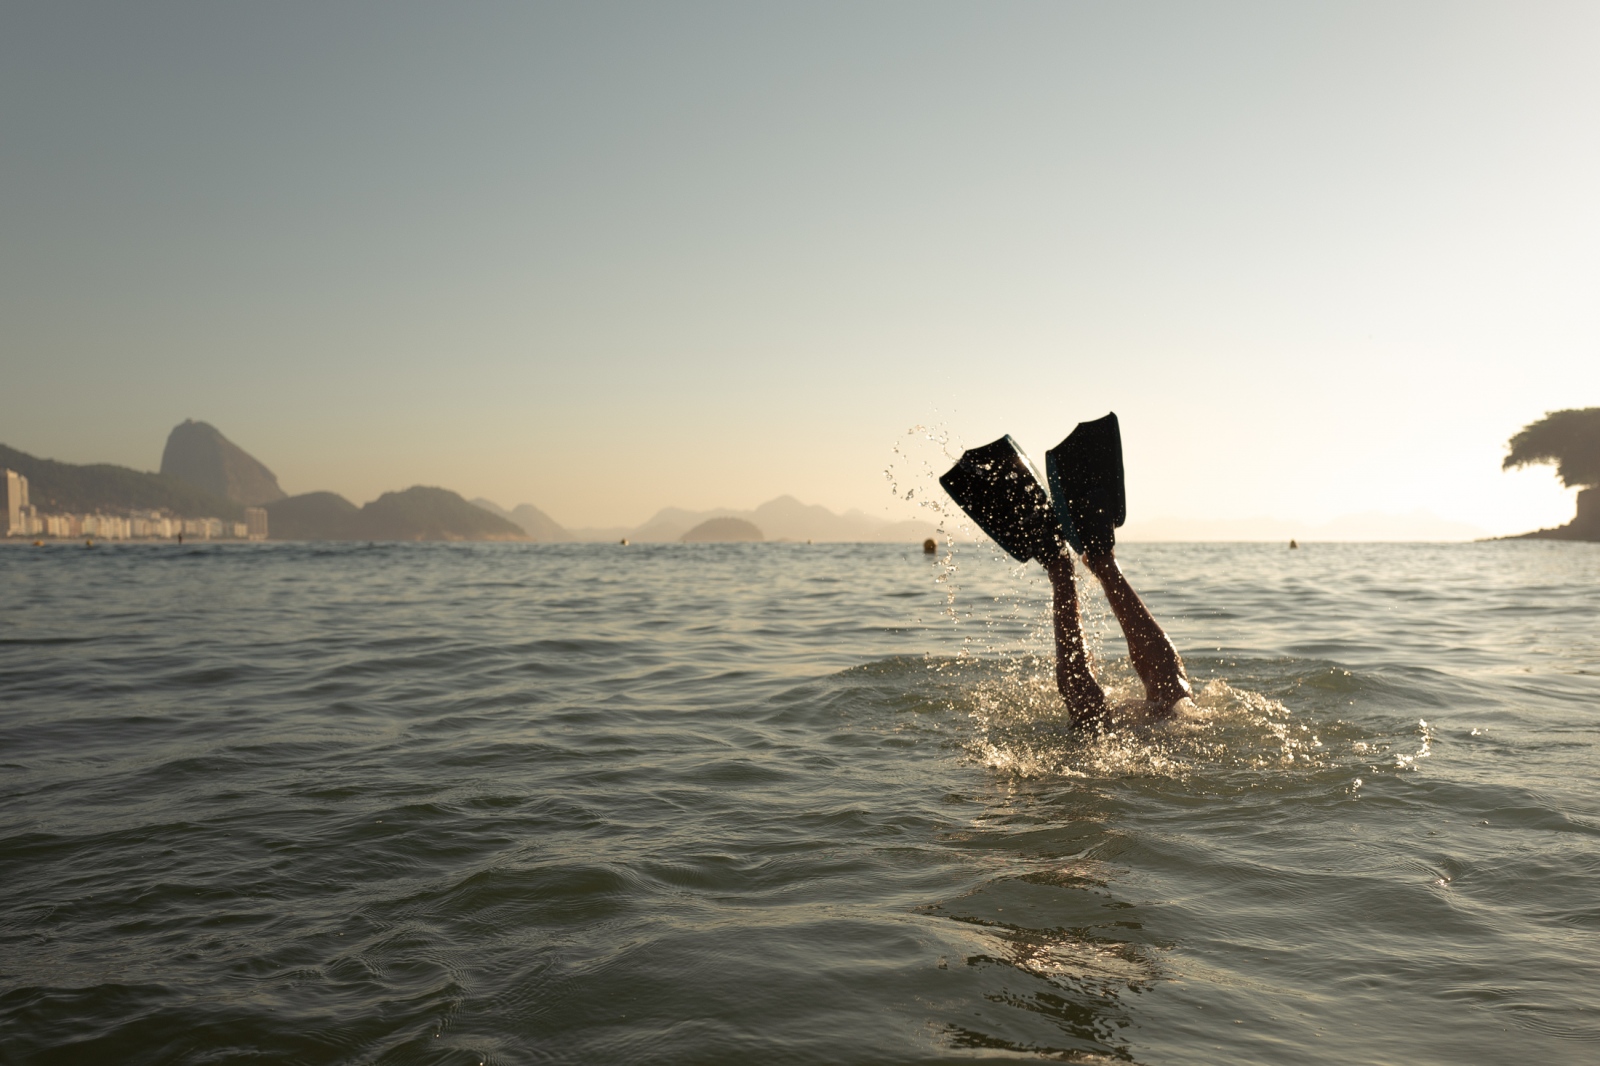 New work on The Wall Street Journal 'The Rush of Bodysurfing in Rio: A Traveler's Guide'